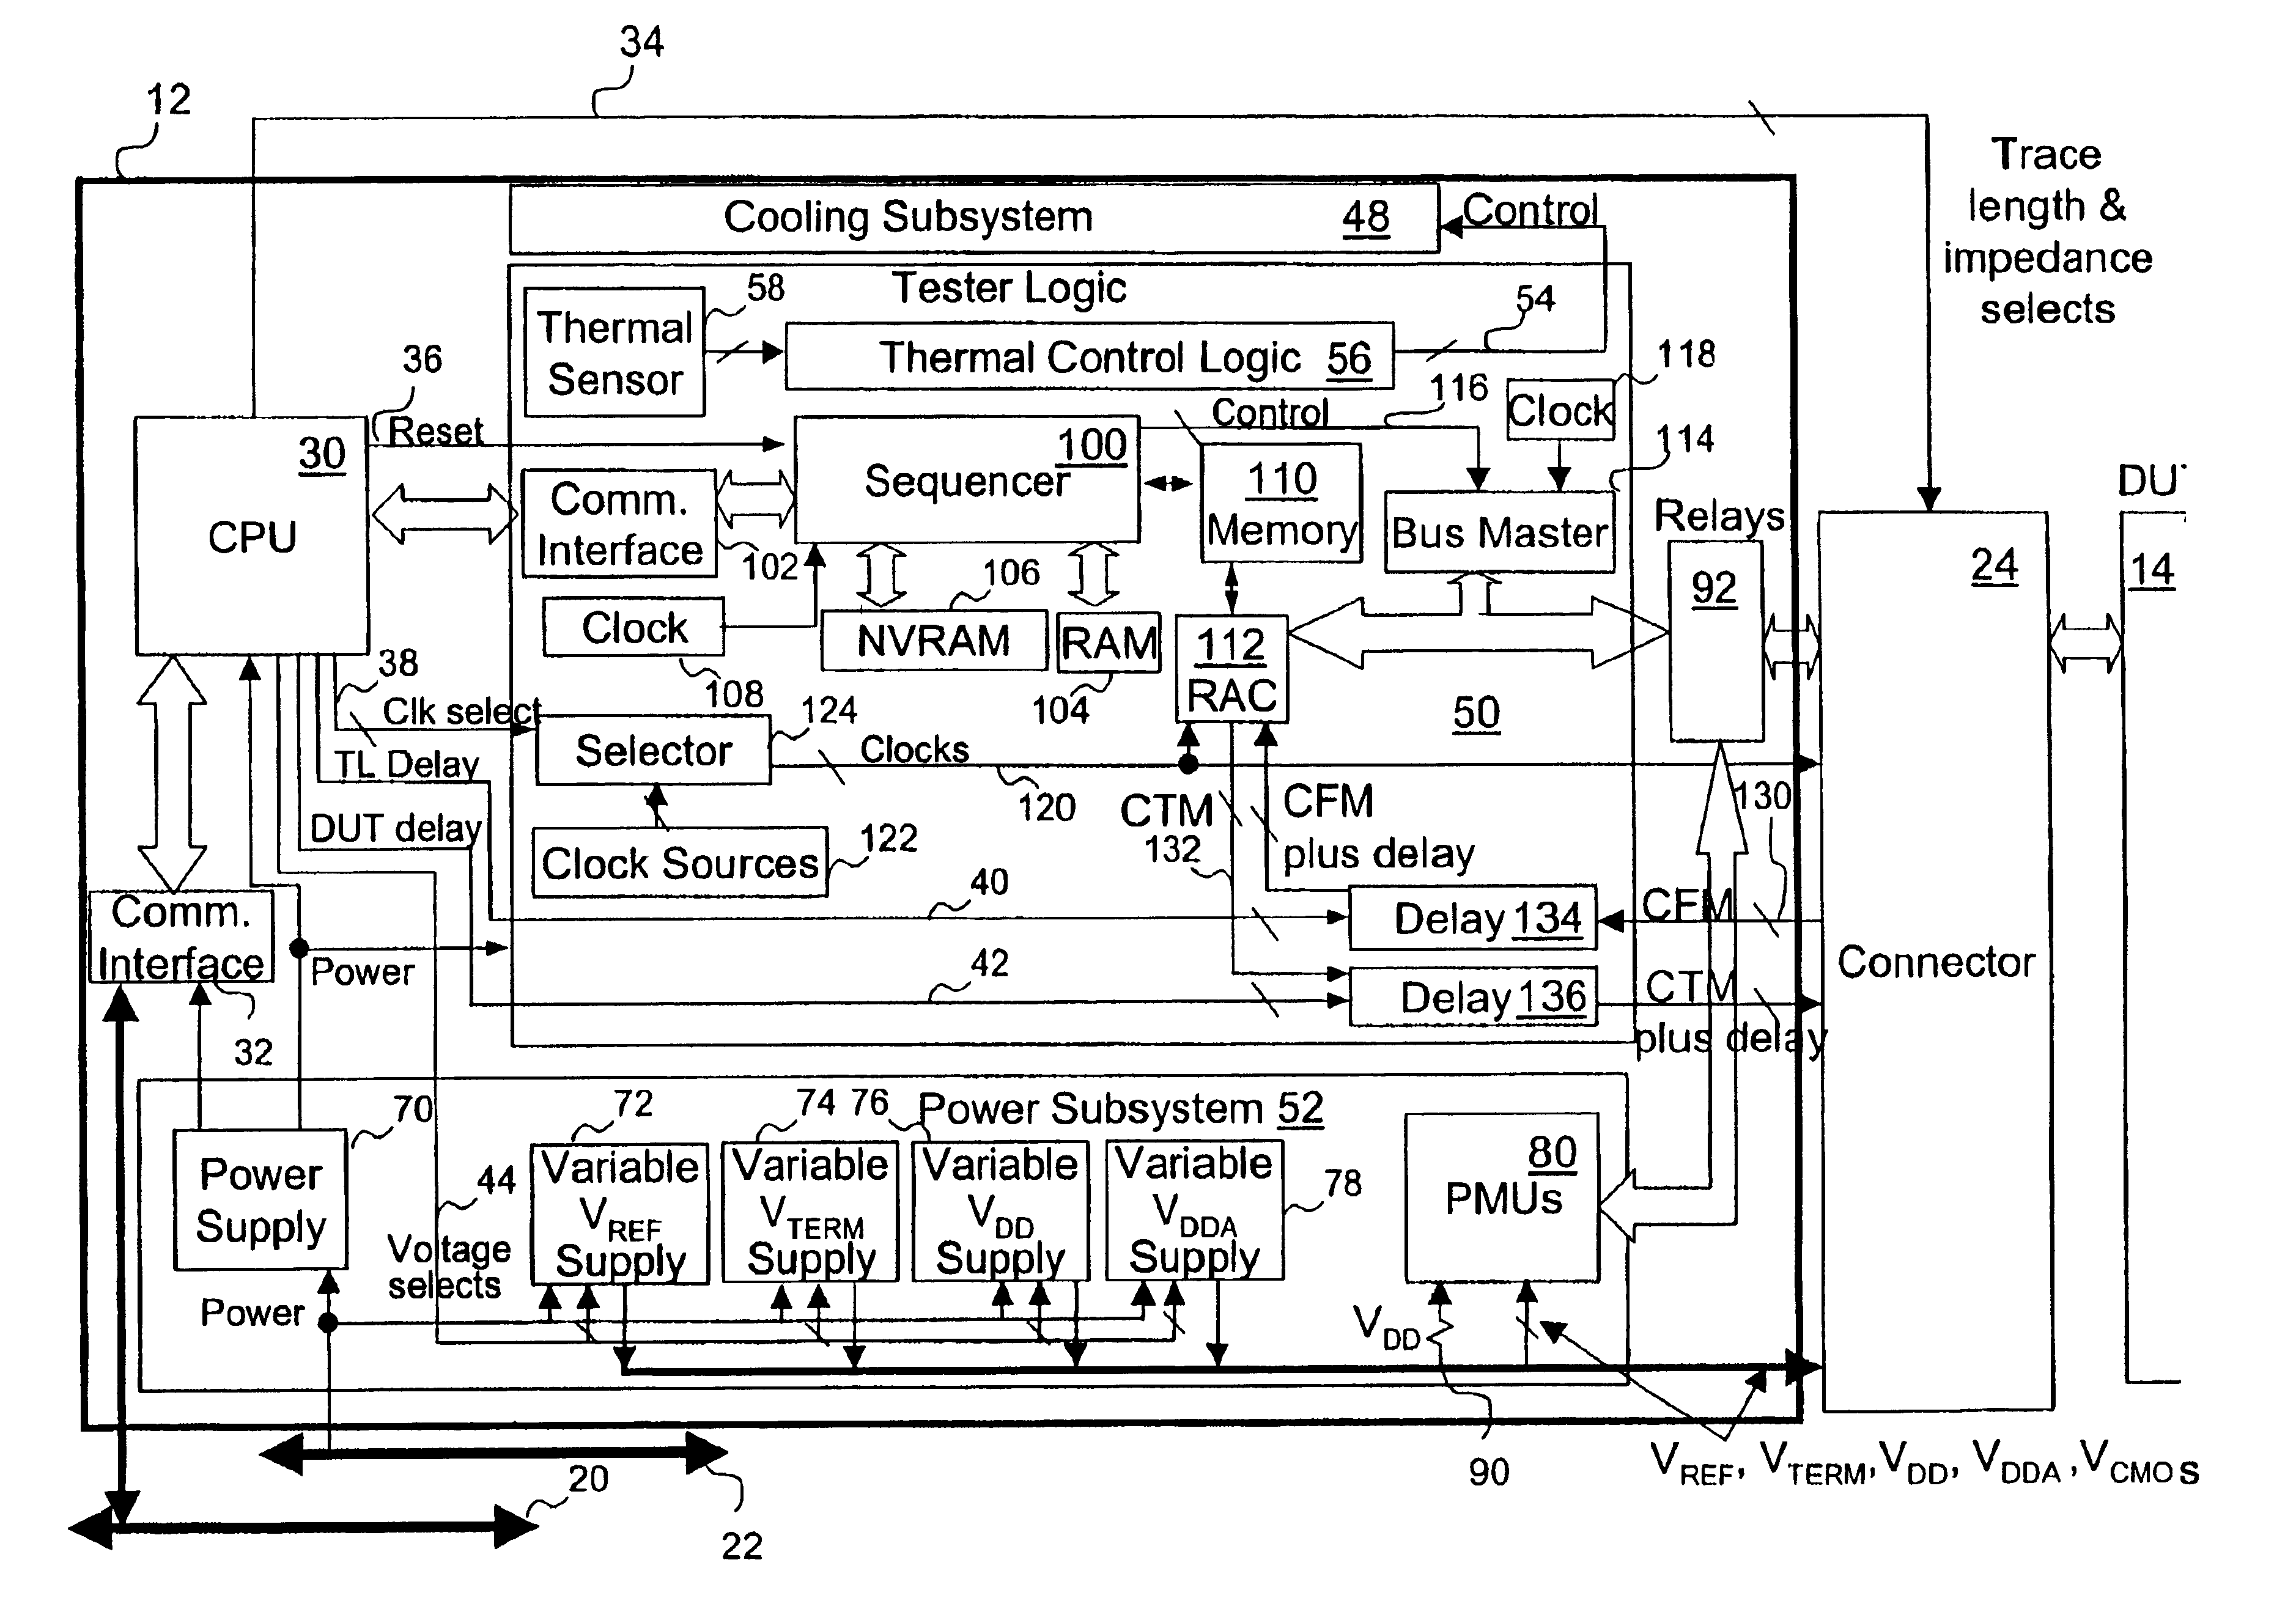 Method and system for wafer and device-level testing of an integrated circuit